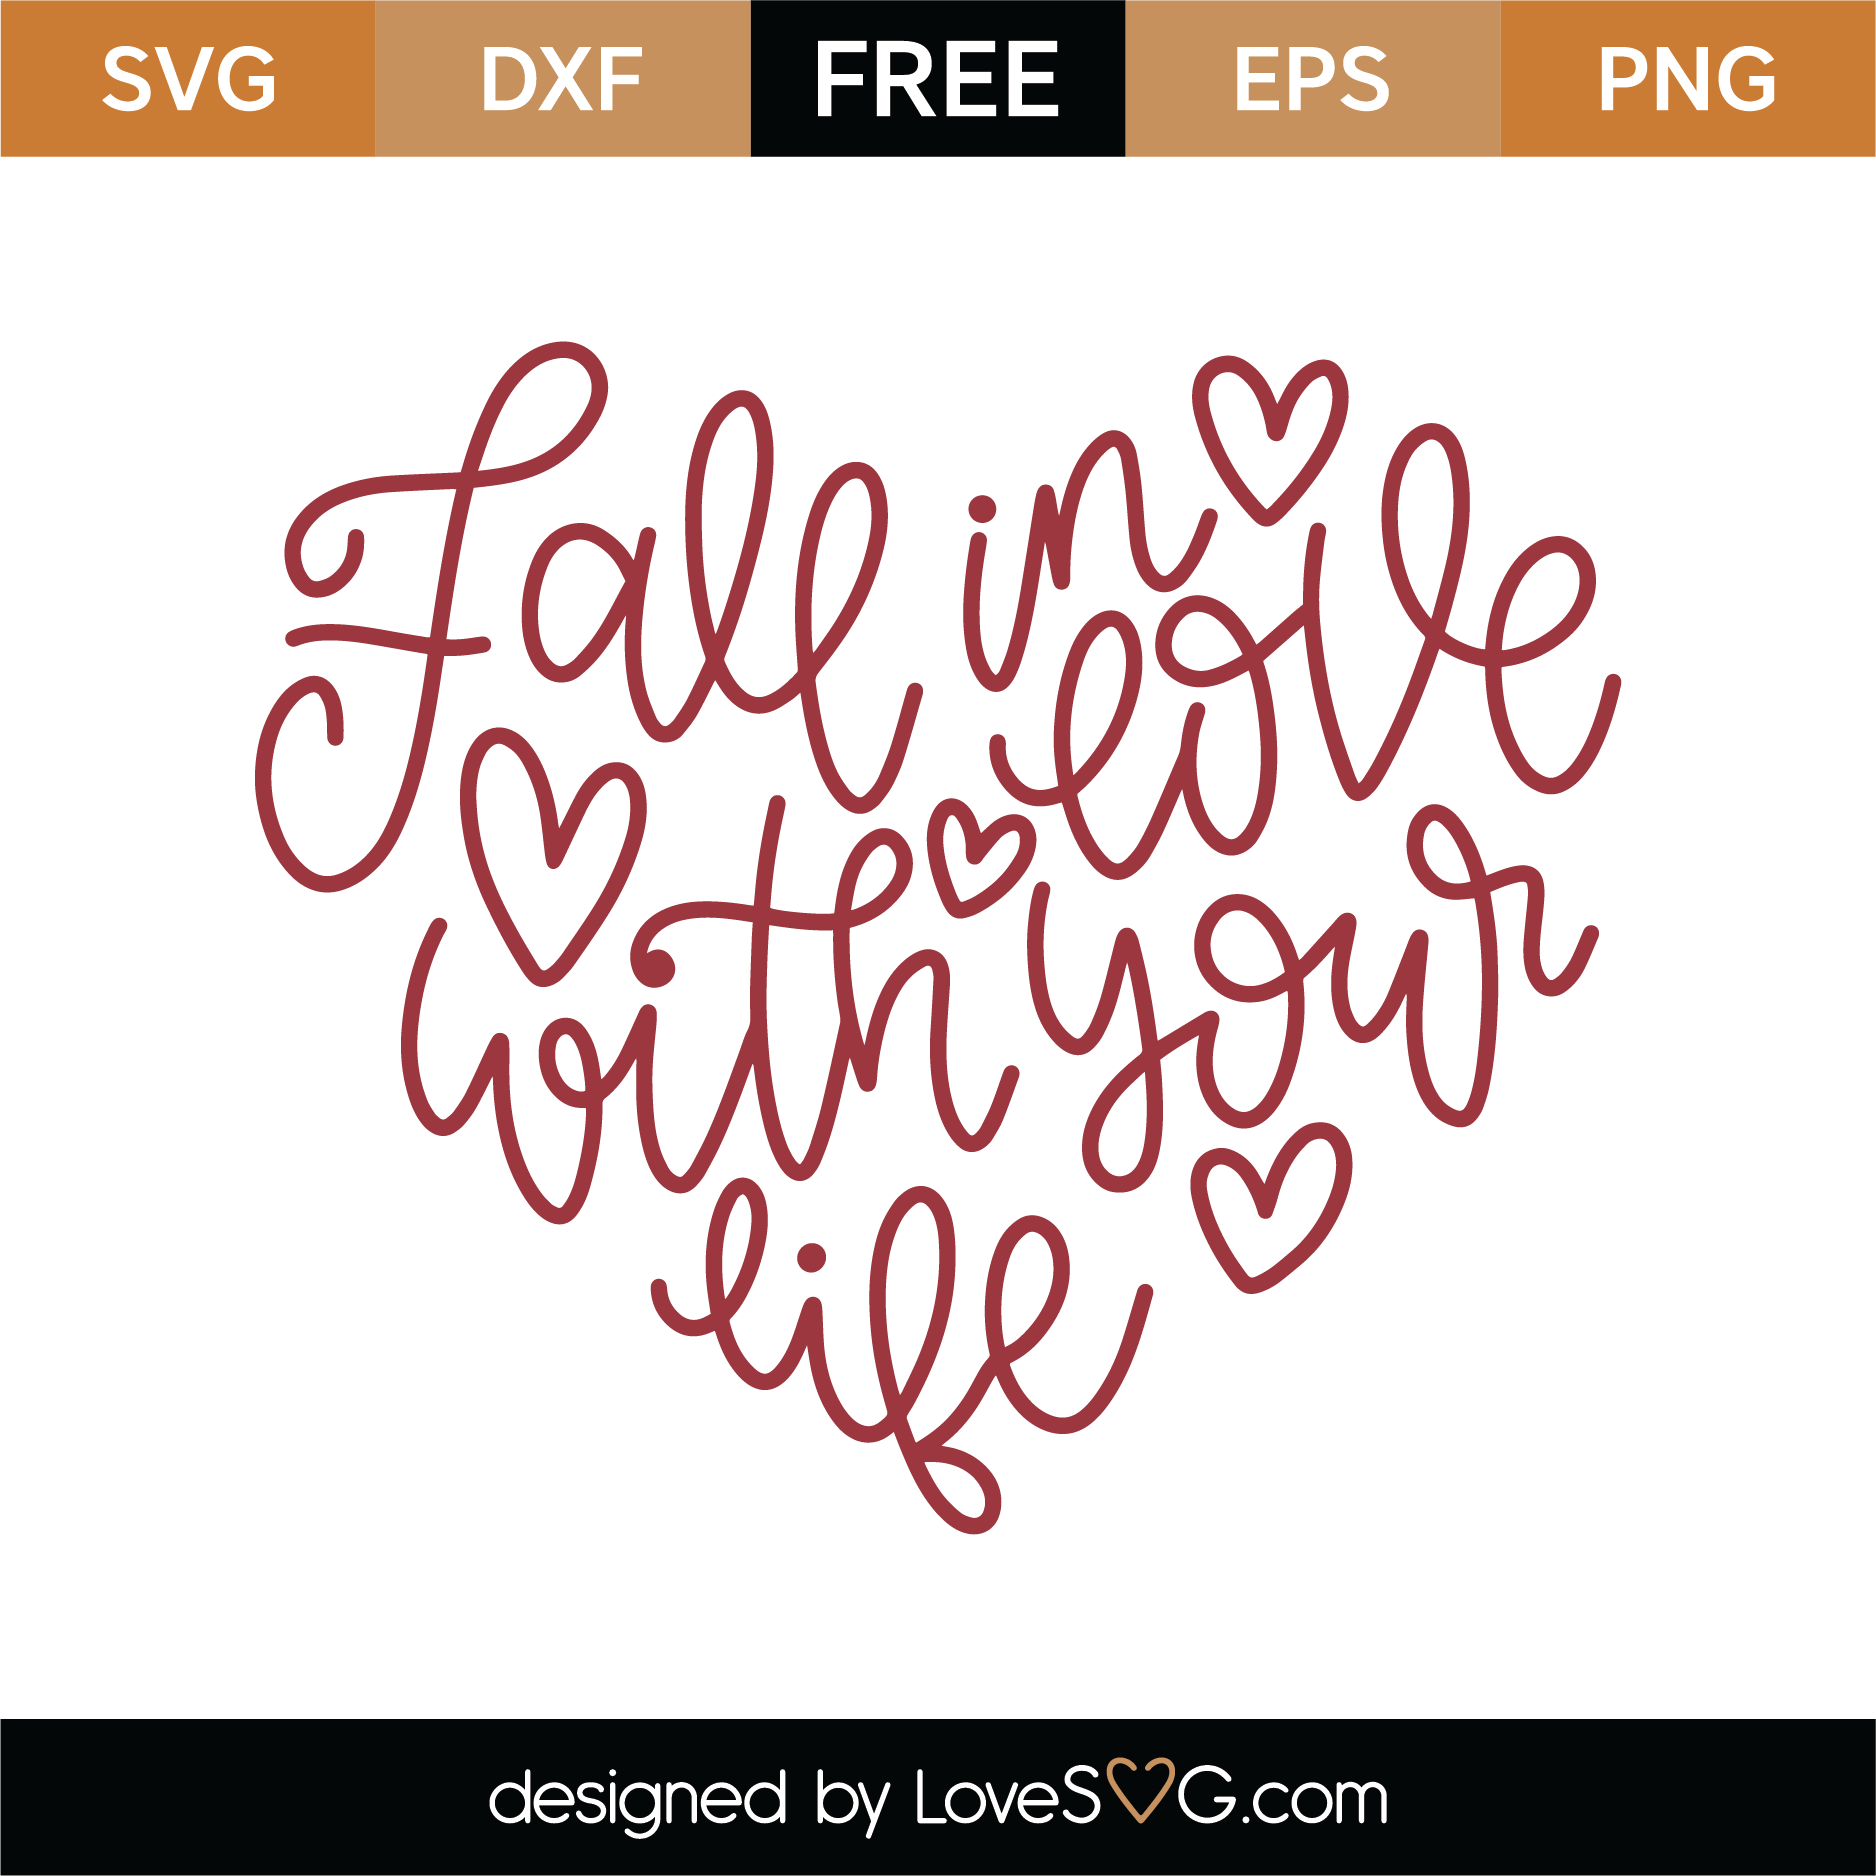 Download Free Fall In Love With Your Life SVG Cut File | Lovesvg.com